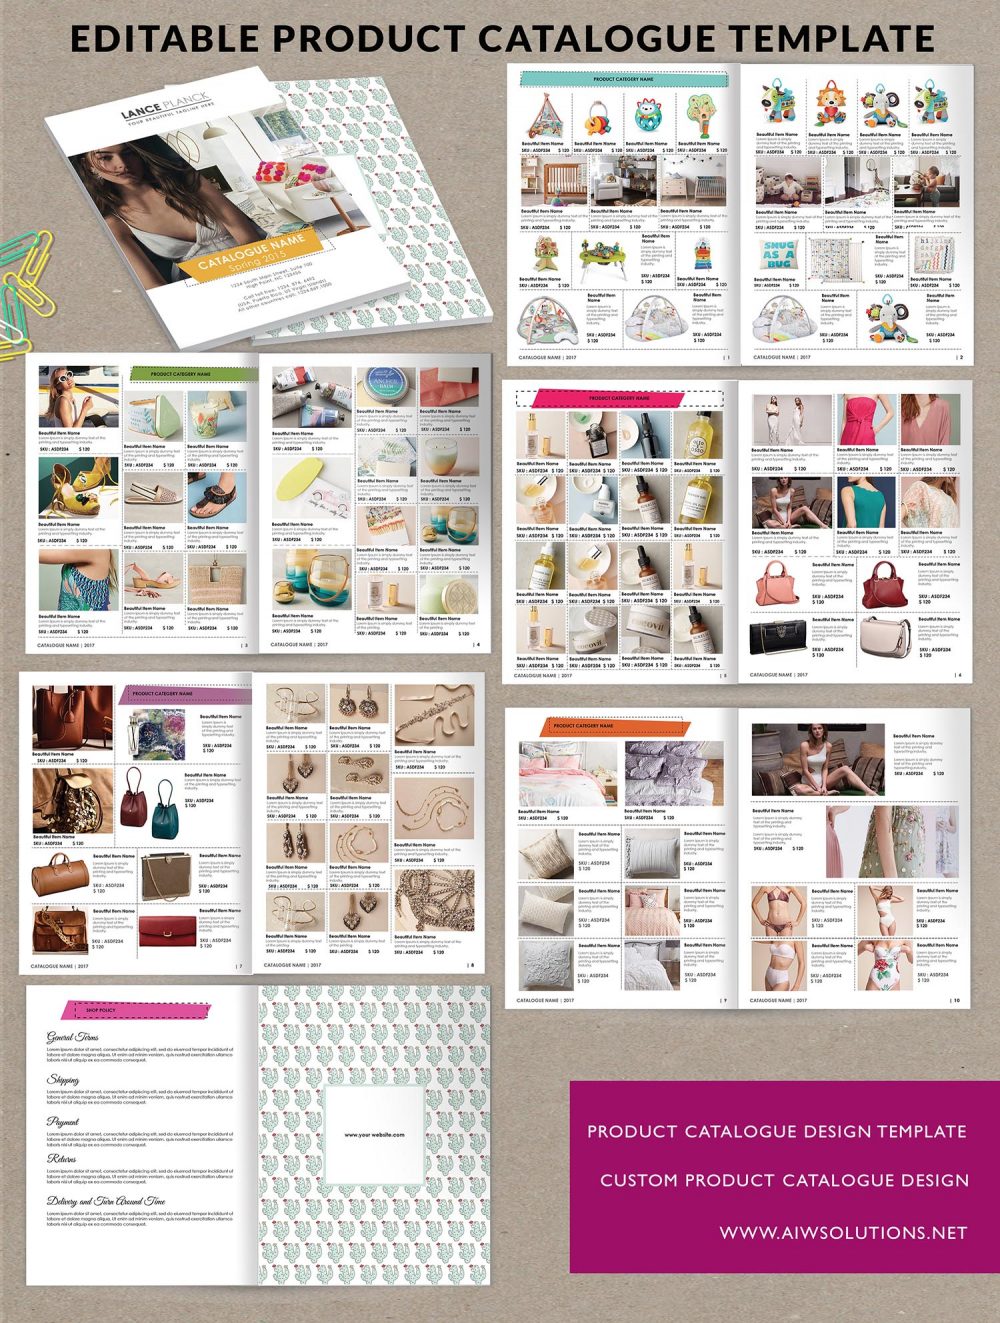 product catalog template for hat catalog, shoe catalog template, hand